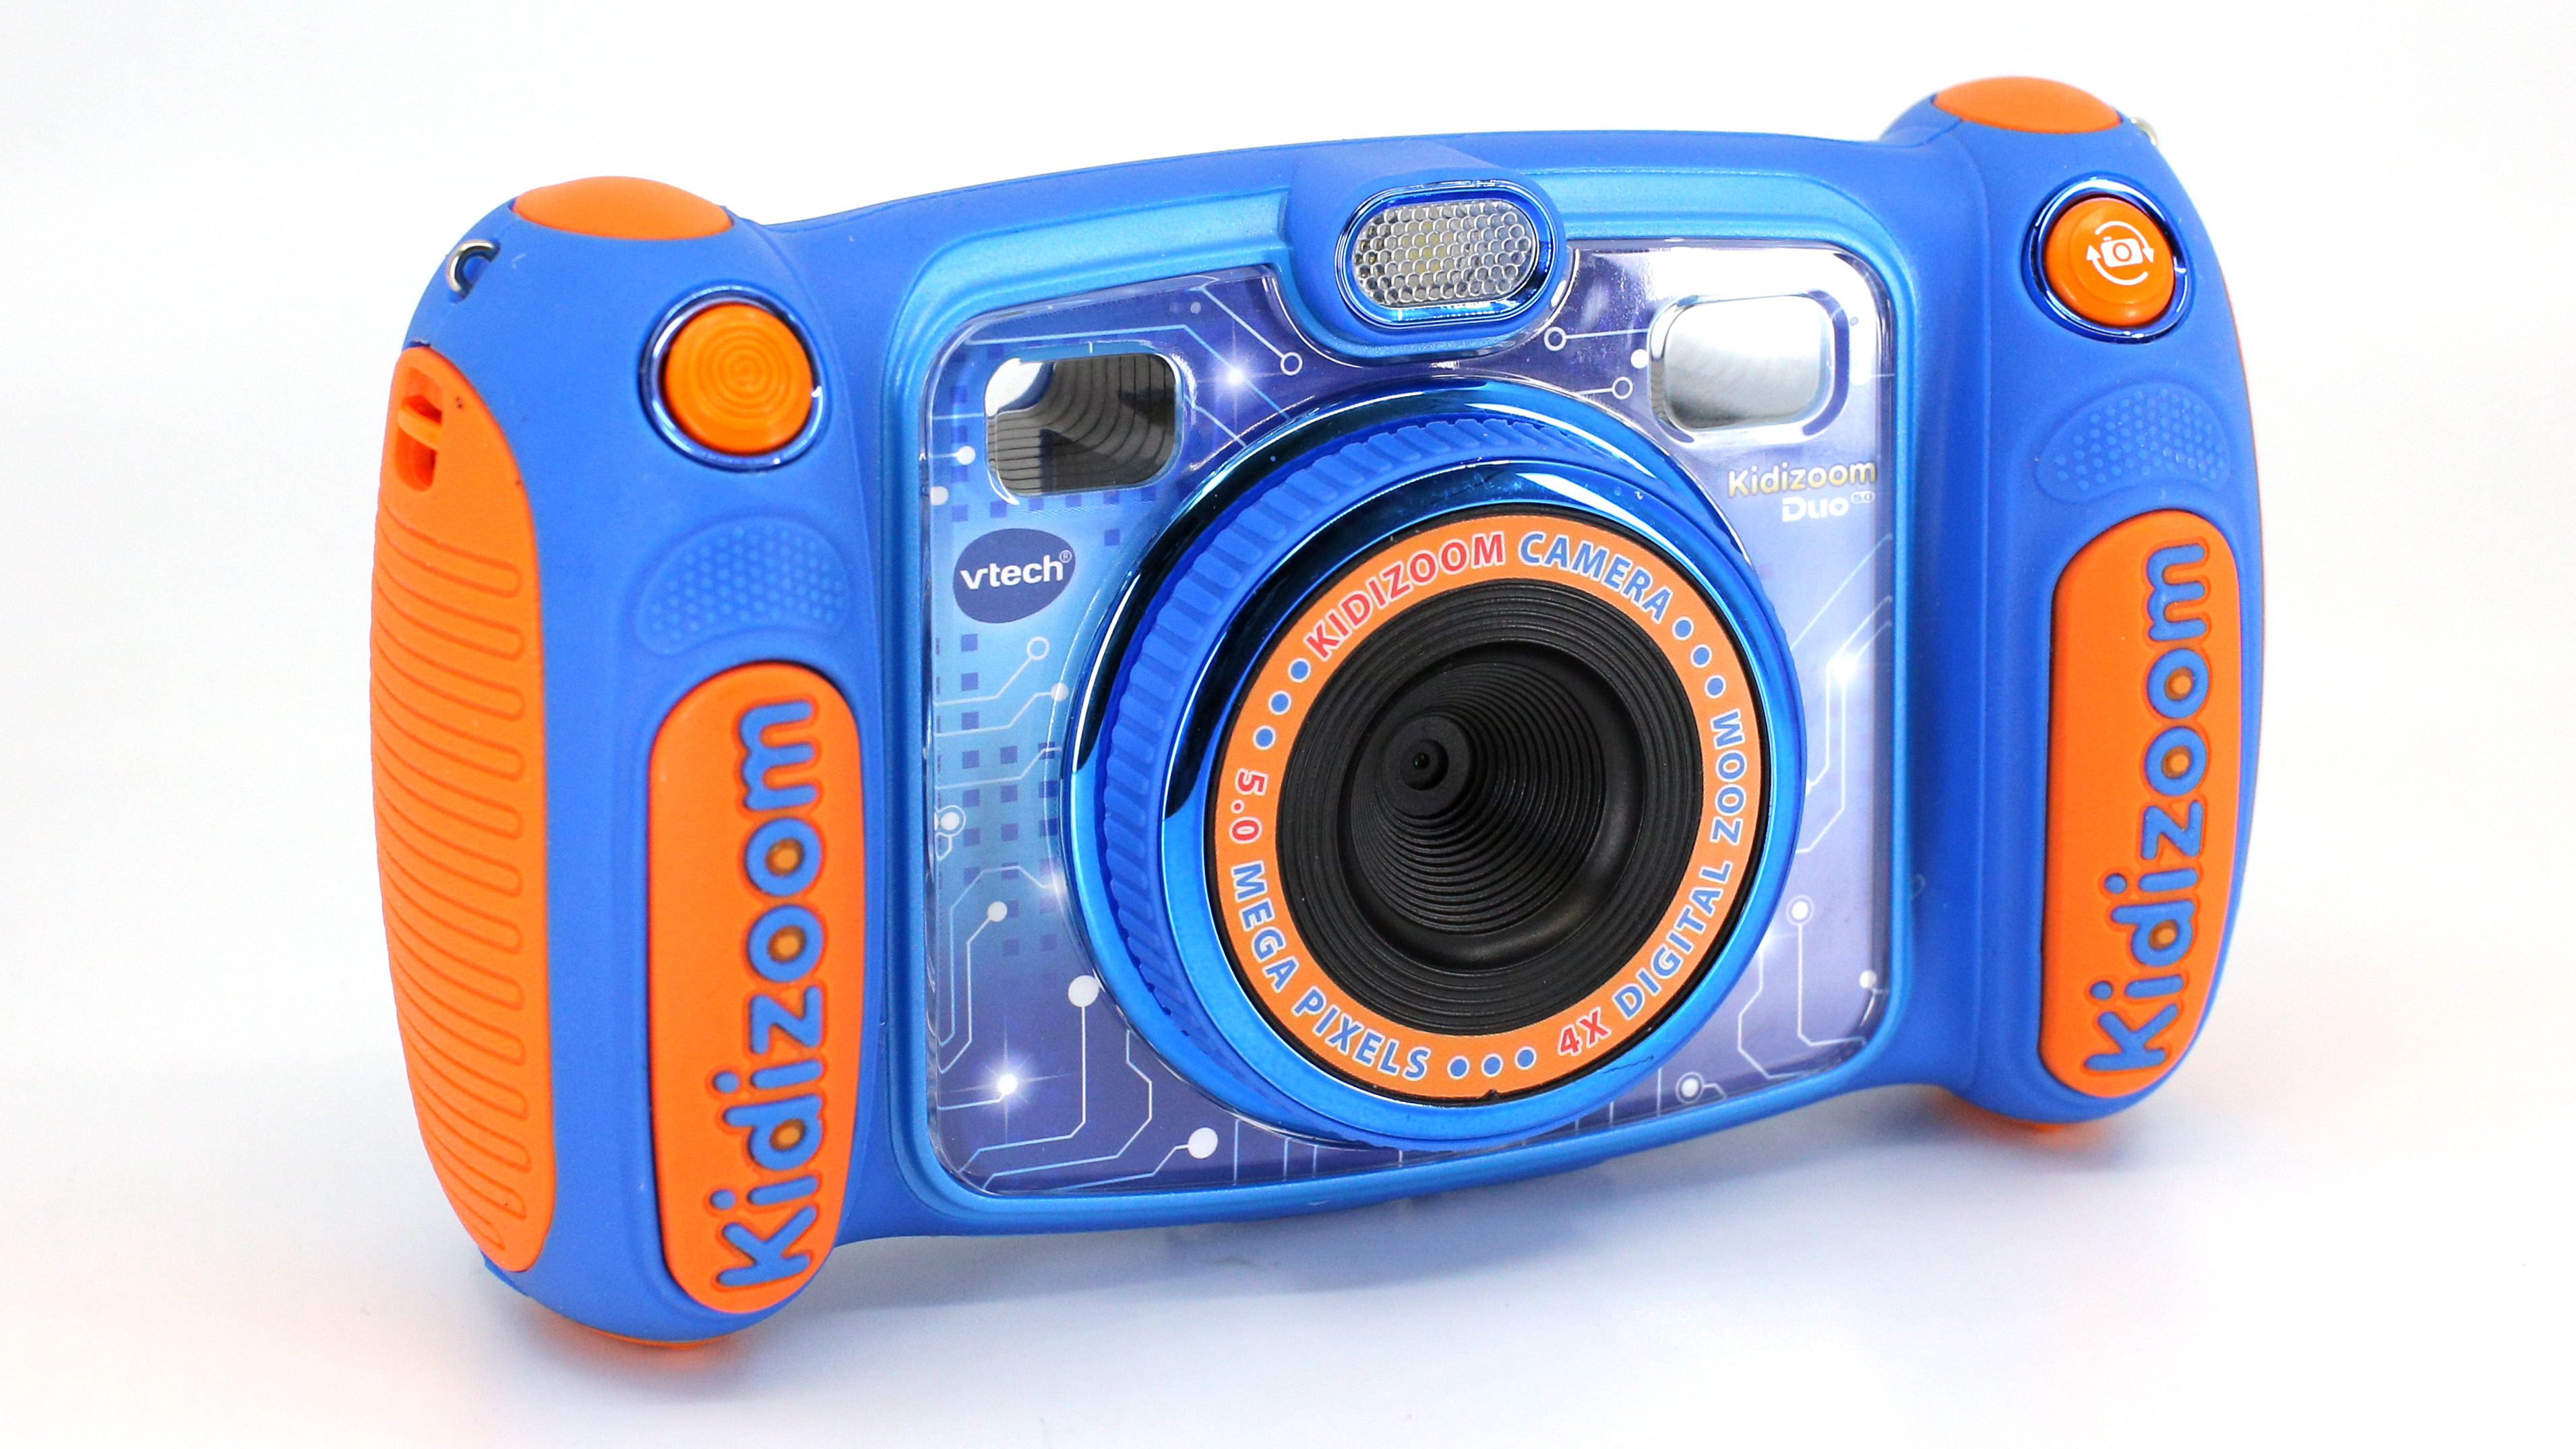 The best cameras for kids: VTech KidiZoom Duo 5.0